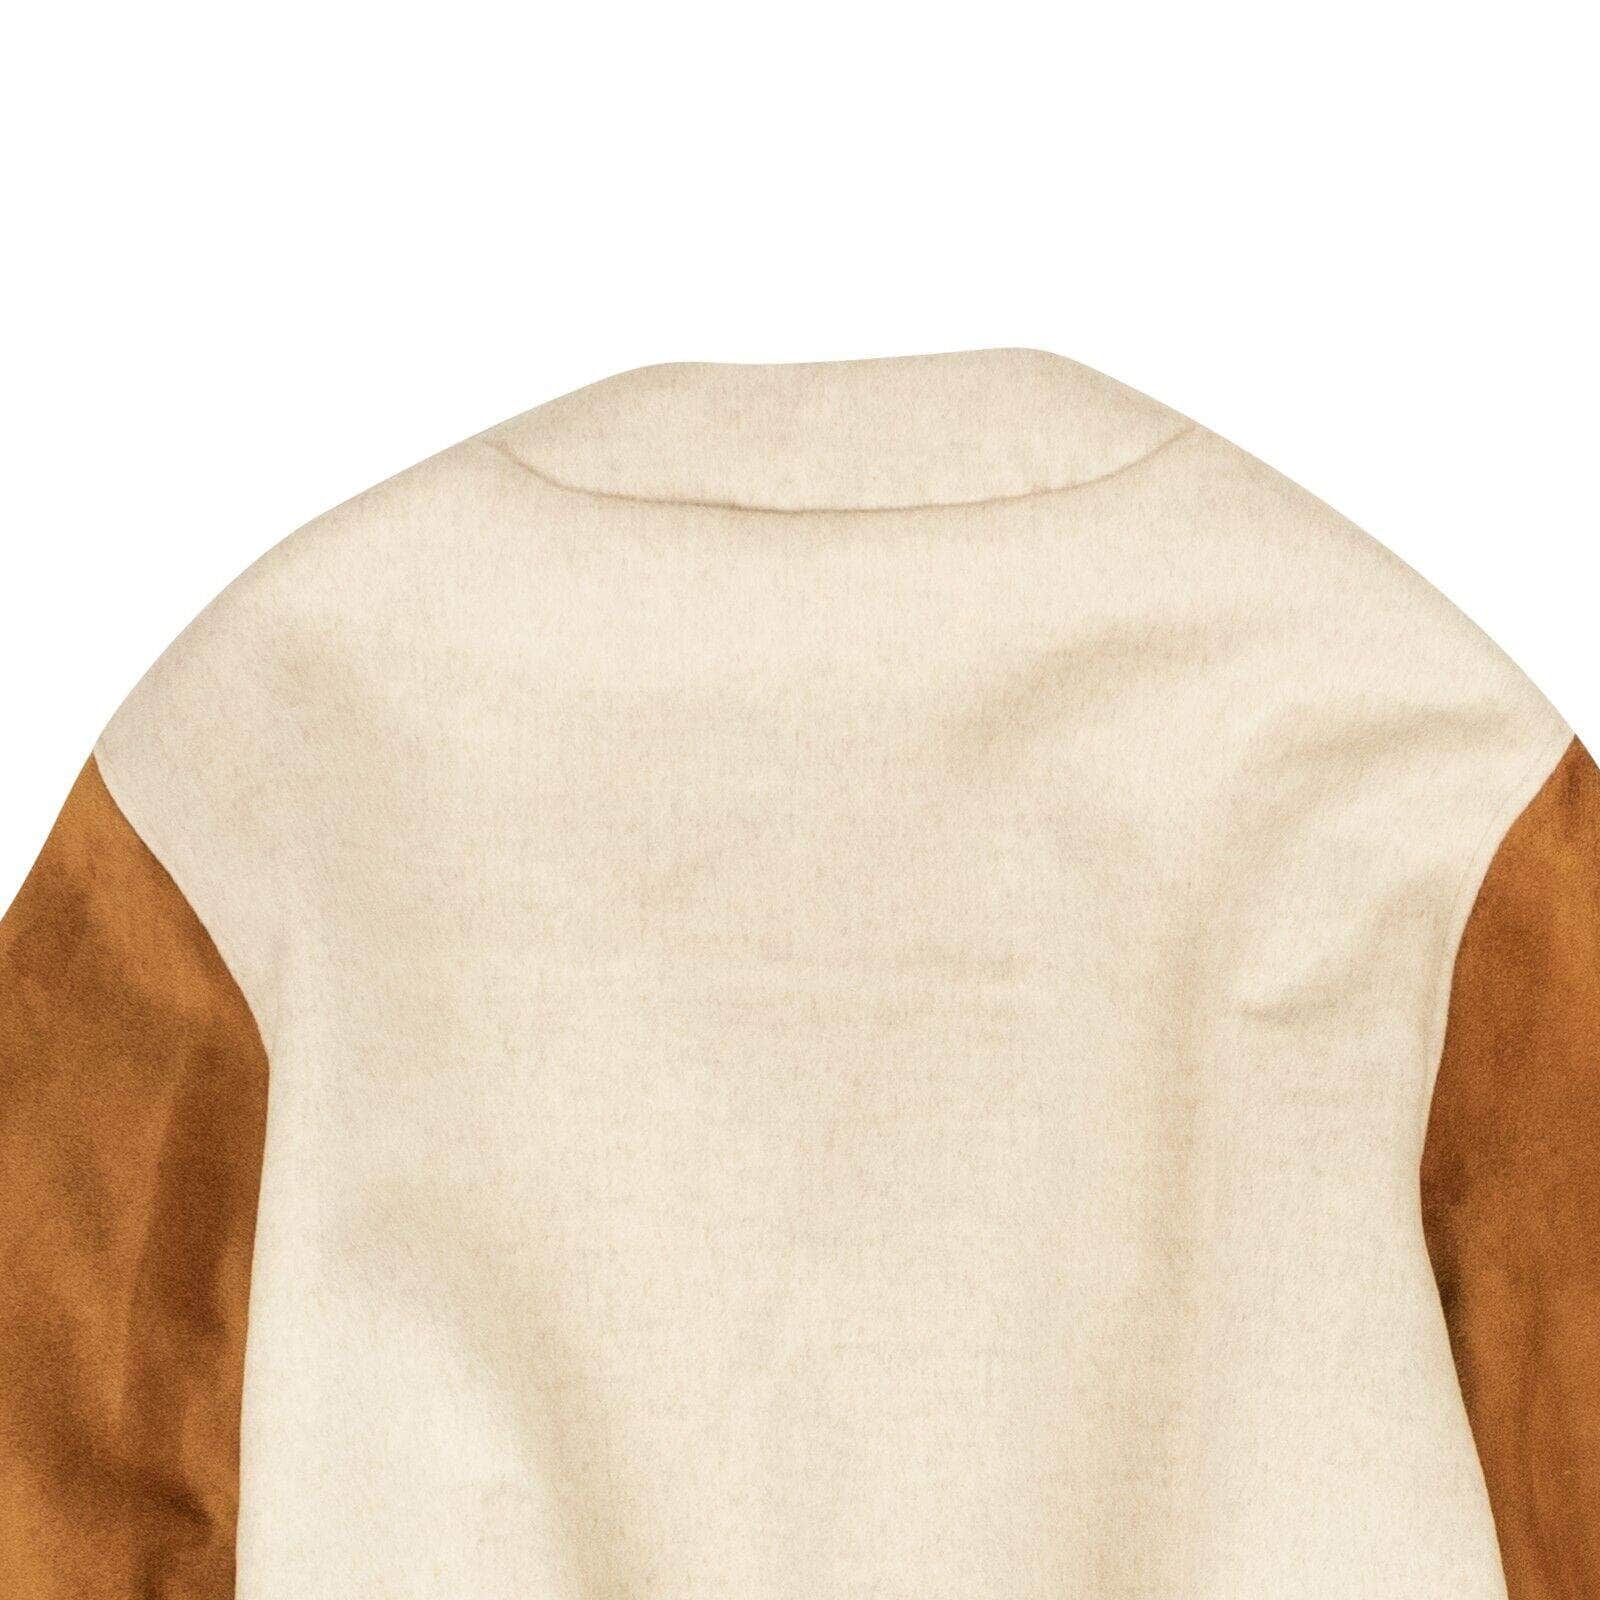 Rhude 1000-2000, channelenable-all, chicmi, couponcollection, gender-mens, main-clothing, mens-bombers, mens-shoes, rhude, shop375, size-l Beige And Tan Cardigan Bomber